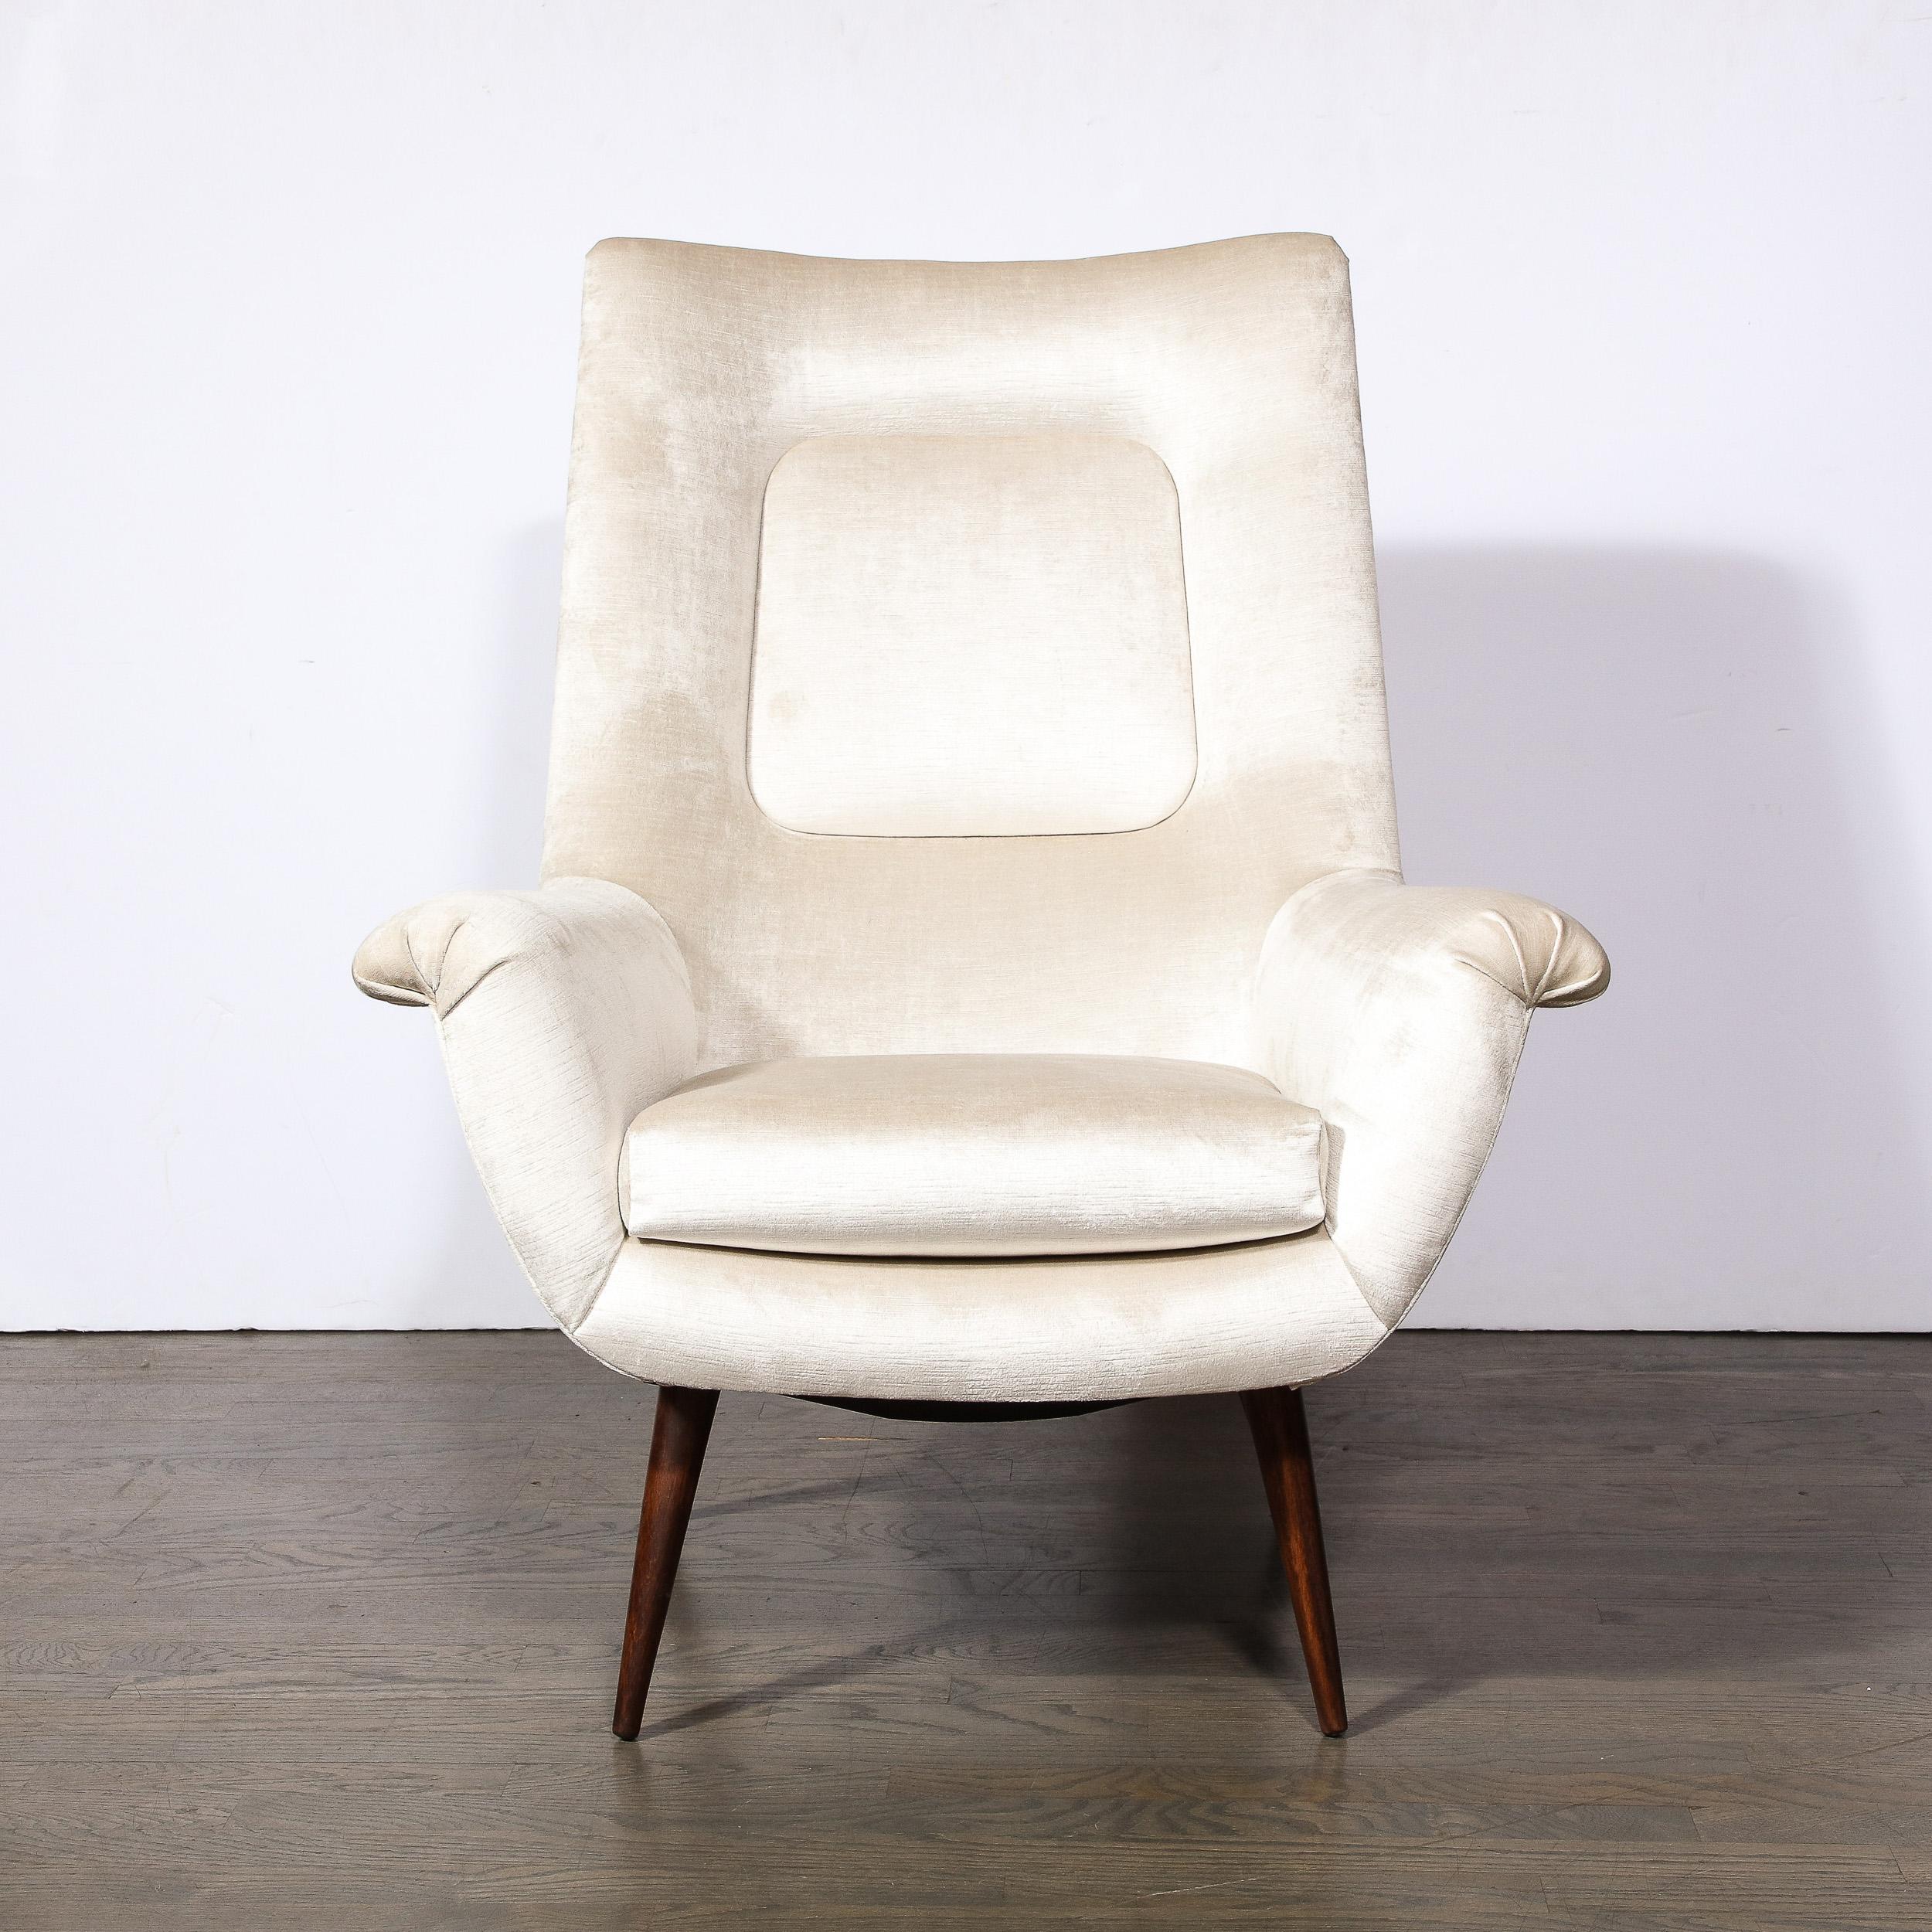 One of Lawrence Peabody's most sought-after designs, this chair is a luxurious addition to your home. Featuring high back profile and simplified scroll form arm rests, forming a beautifully sumptuous lounge chair newly upholstered in Platinum